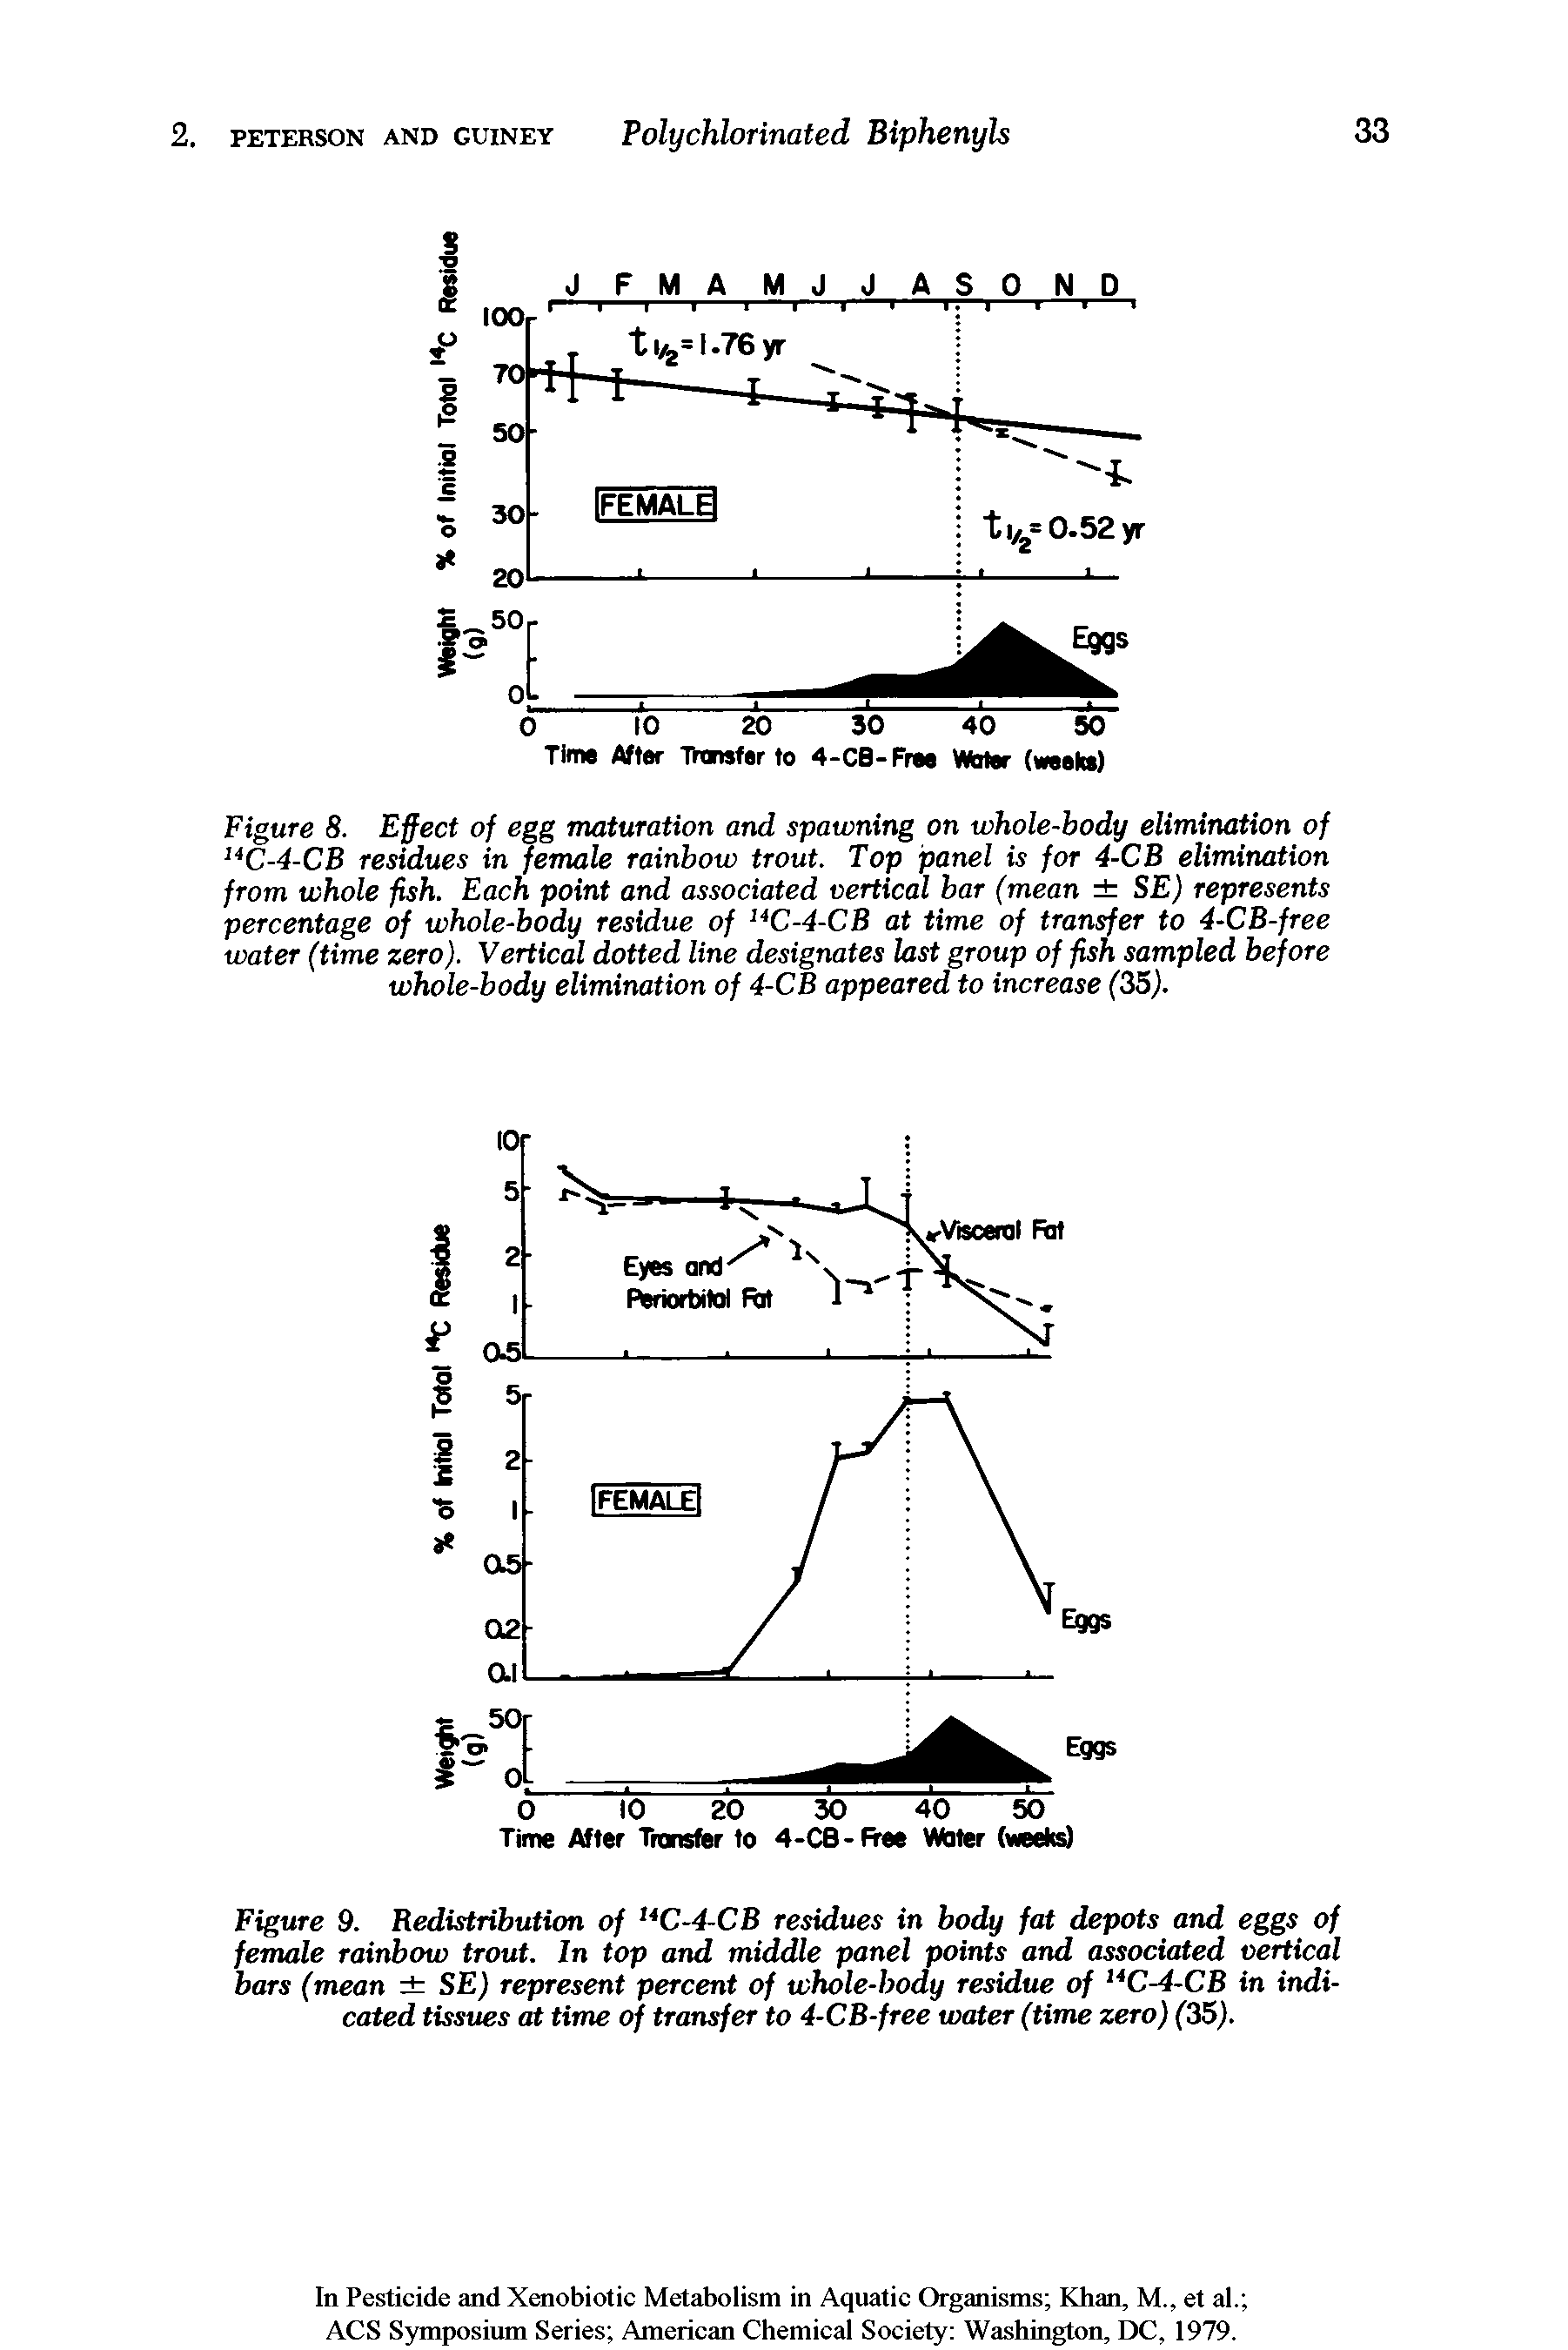 Figure 8. Effect of egg maturation and spawning on whole-body elimination of, 4C-4-CB residues in female rainbow trout. Top panel is for 4-CB elimination from whole fish. Each point and associated vertical bar (mean SE) represents percentage of whole-body residue of I4C-4-CB at time of transfer to 4-CB-free water (time zero). Vertical dotted line designates last group of fish sampled before whole-body elimination of 4-CB appeared to increase (35).